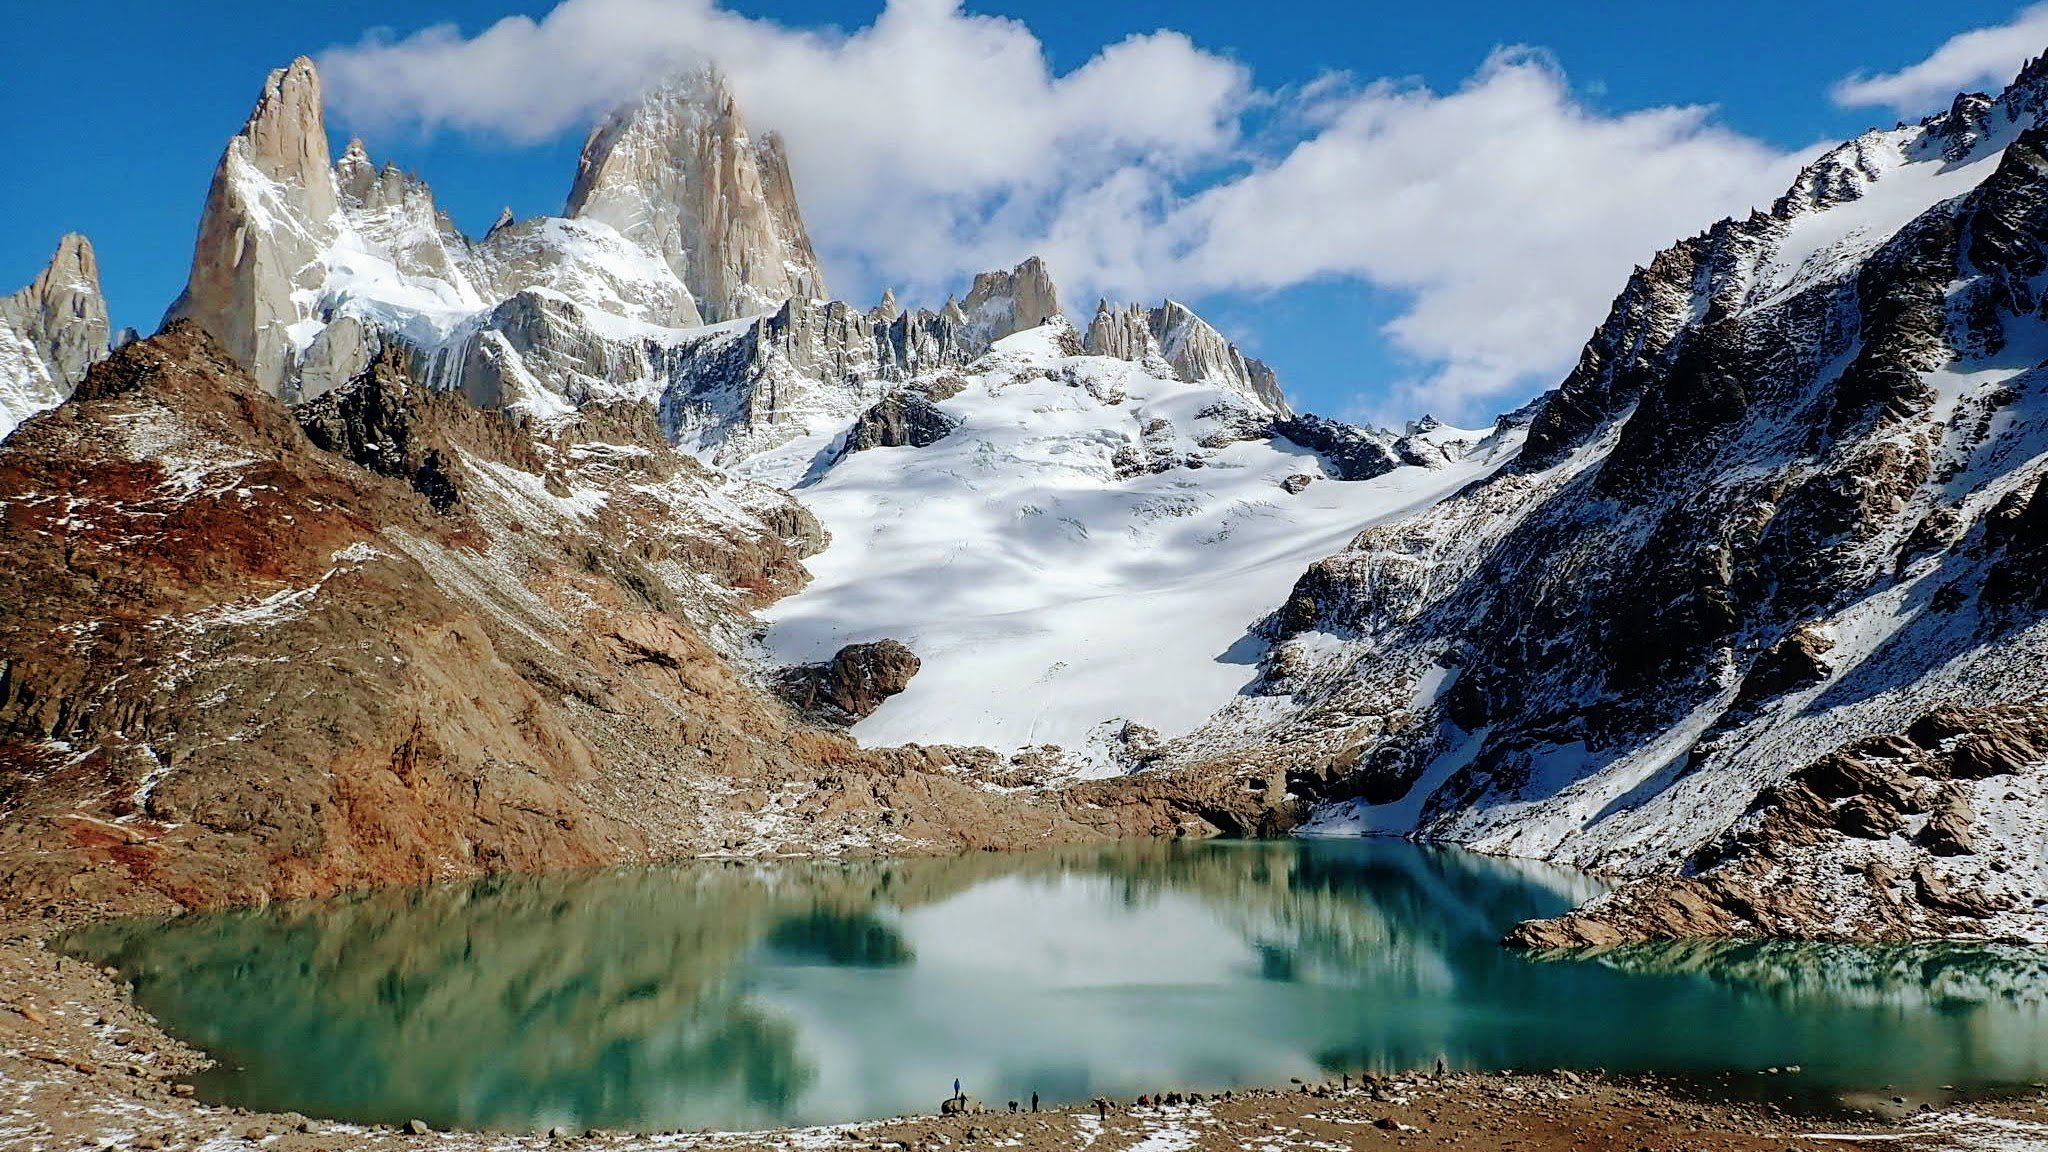 Rocky mountain spires with glacier and bright blue alpine lake